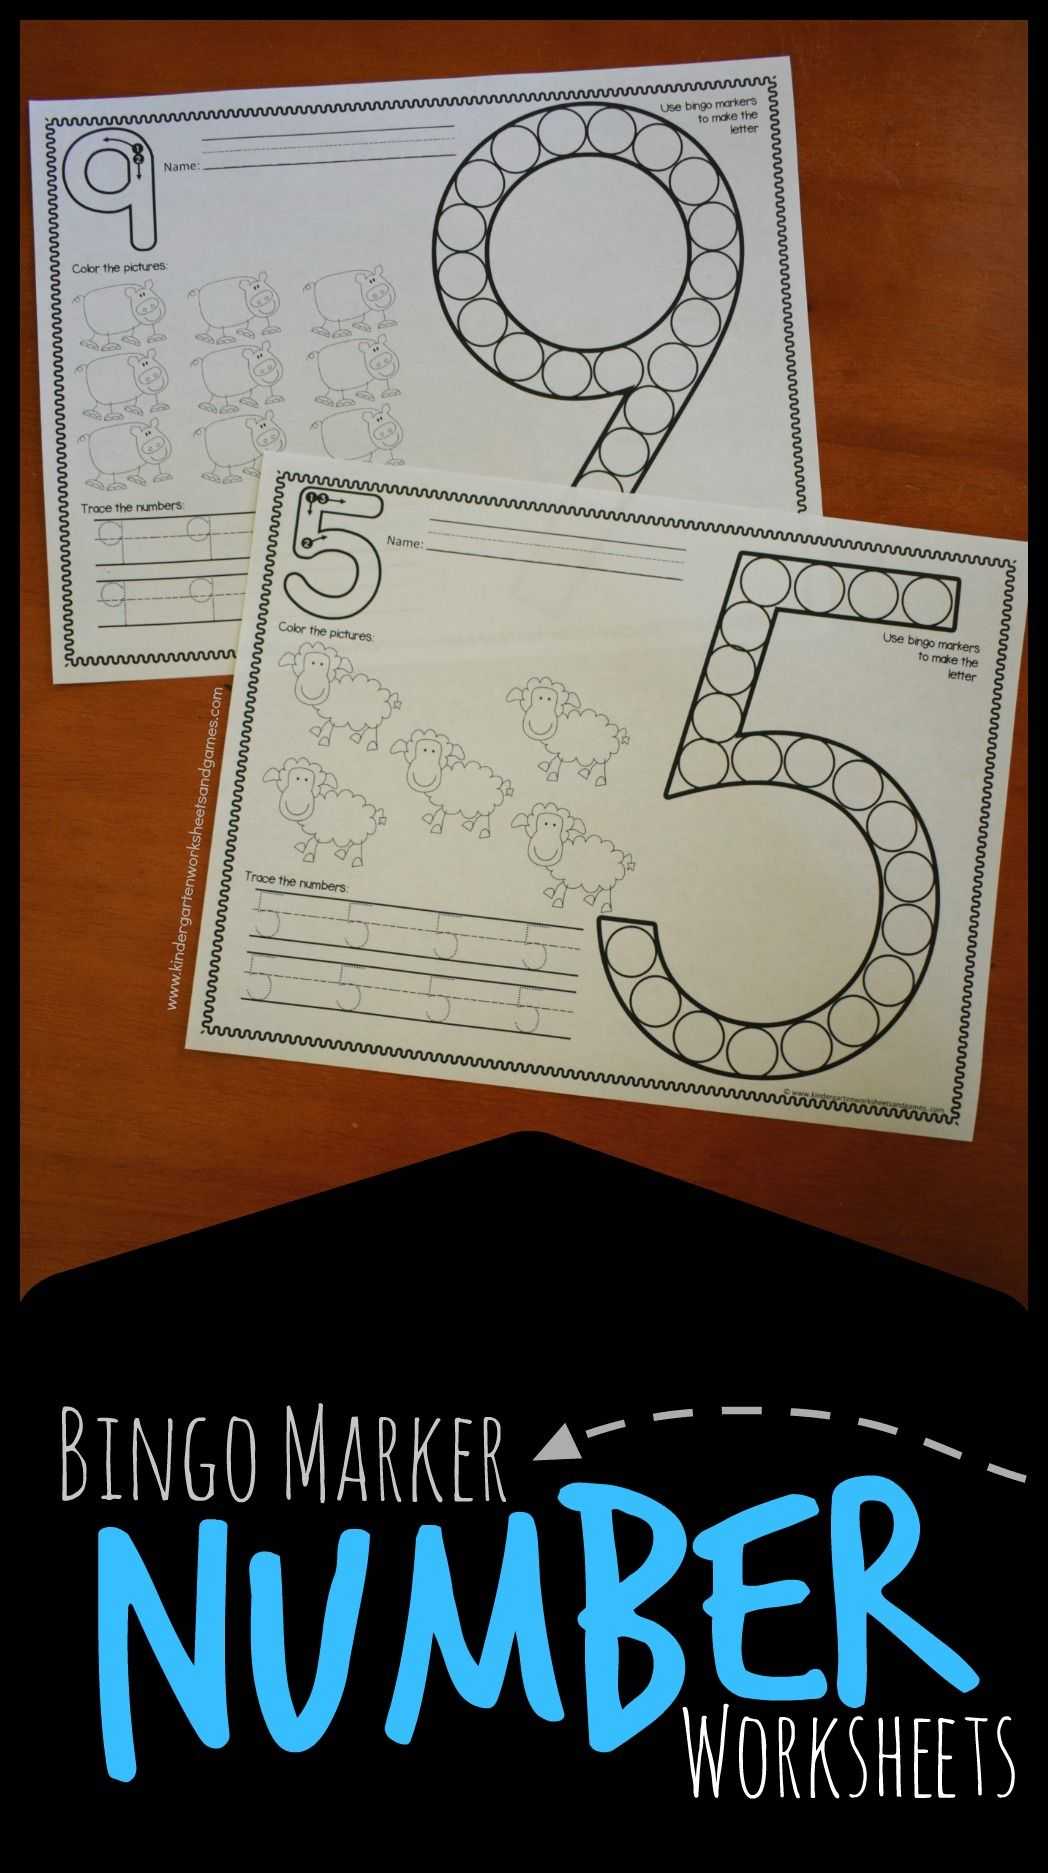 Alphabet Recognition Worksheets for Kindergarten and Free Bingo Marker Number Worksheets these are Such A Fun Counting